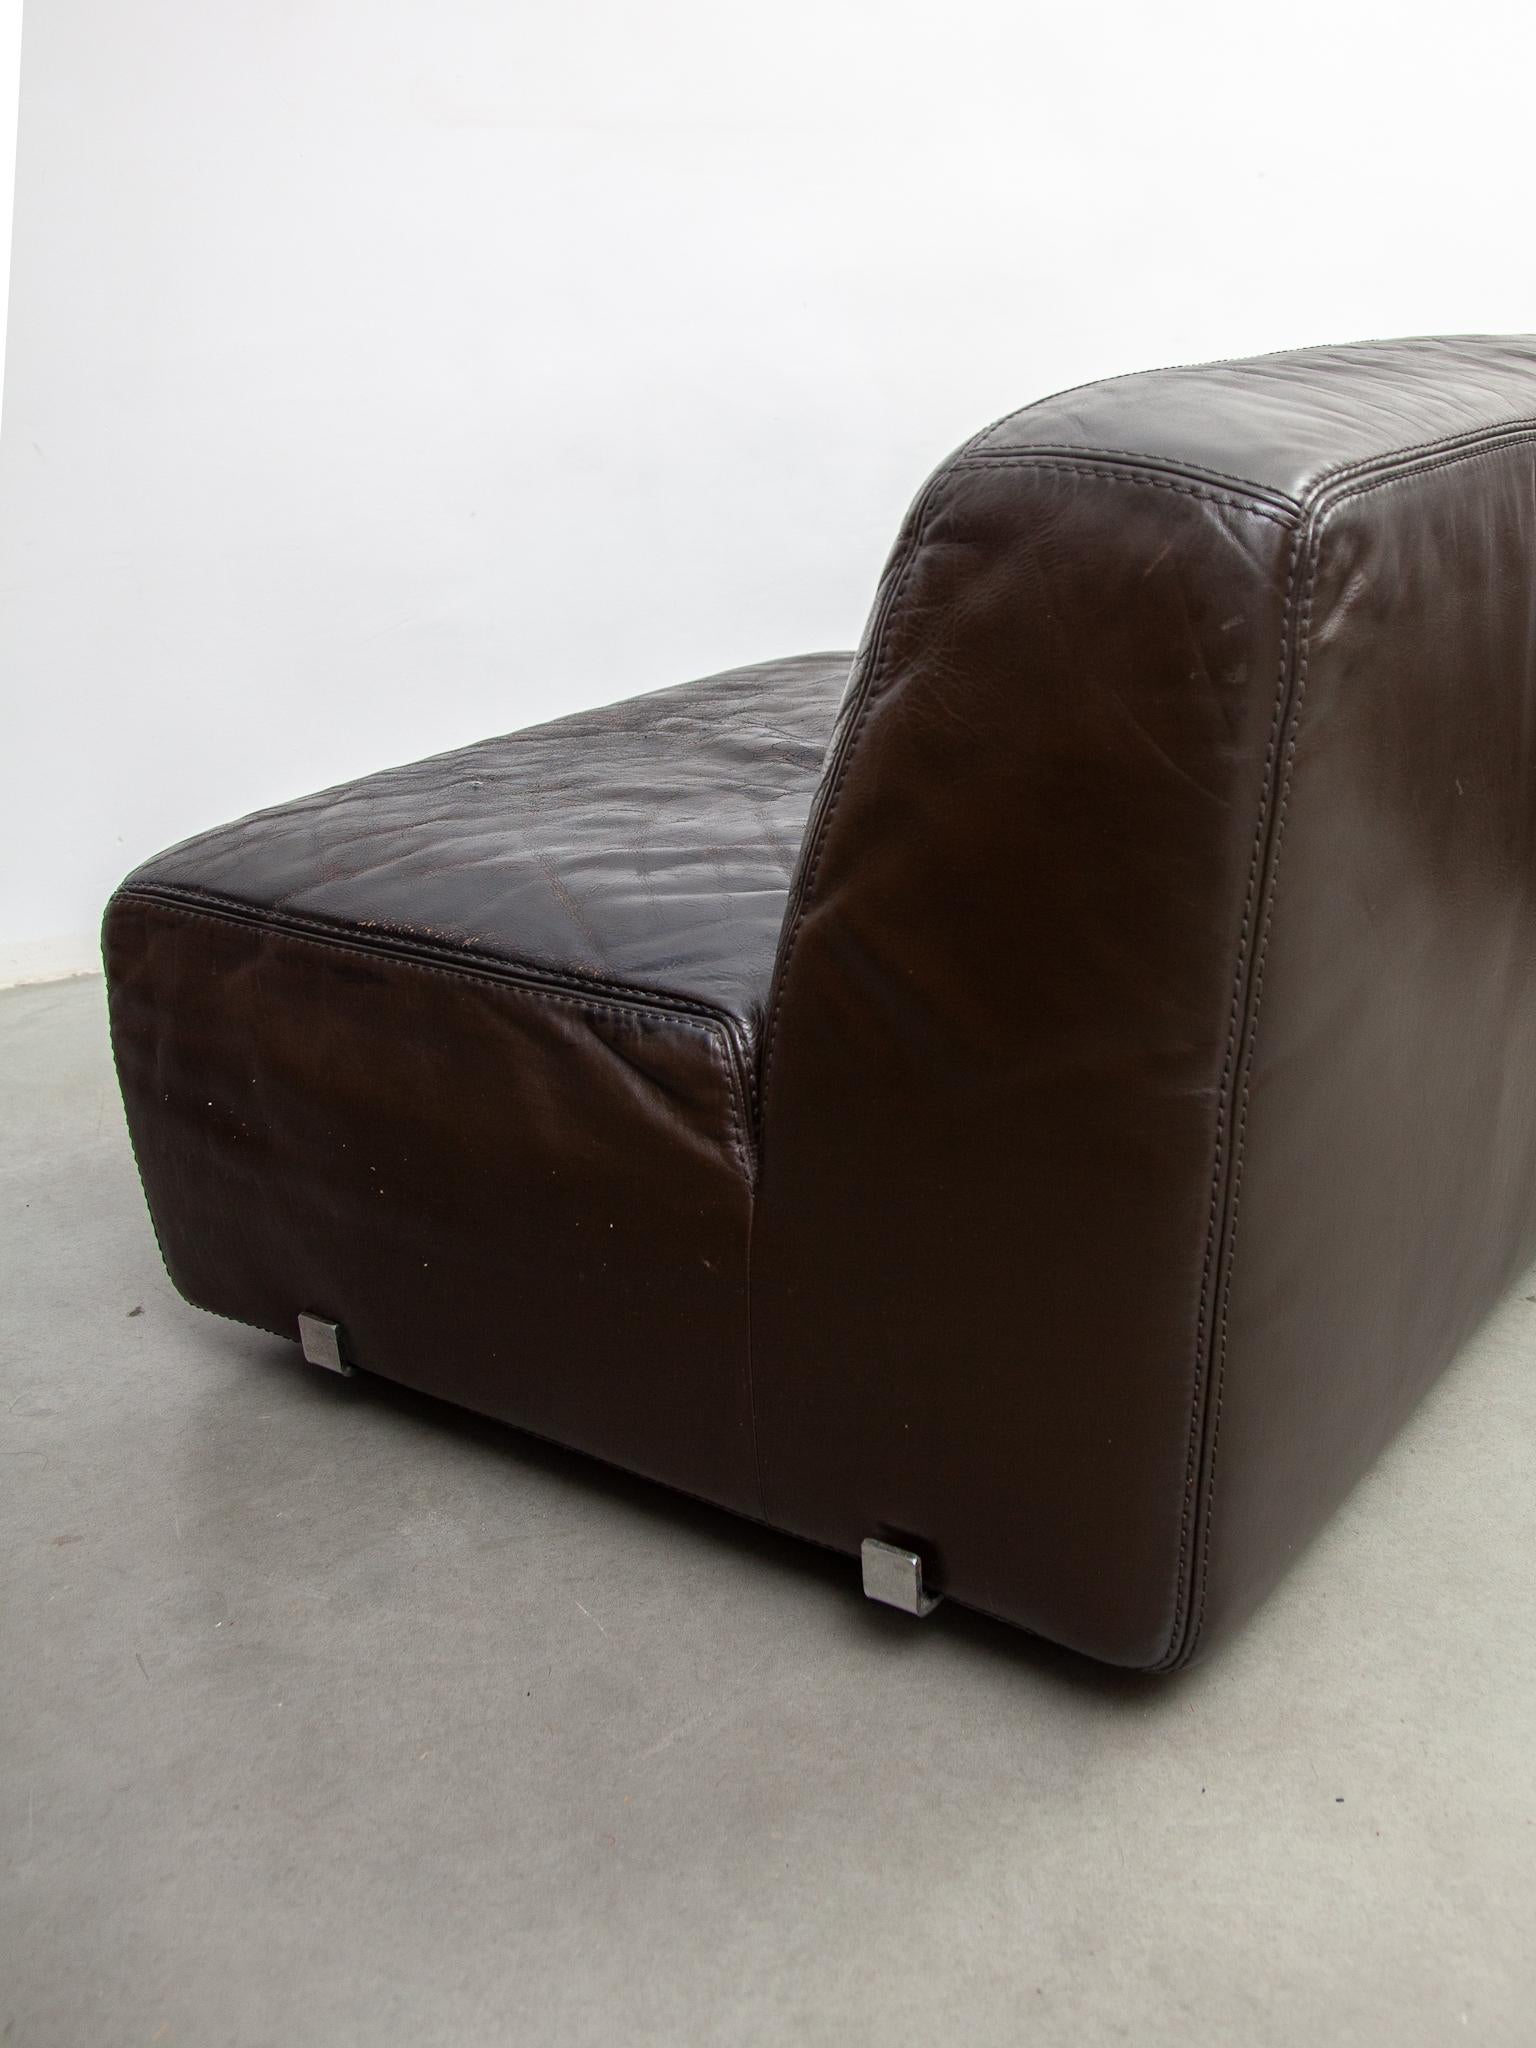 Modular Sofa 1970s Brown Leather designed by Durlet For Sale 7